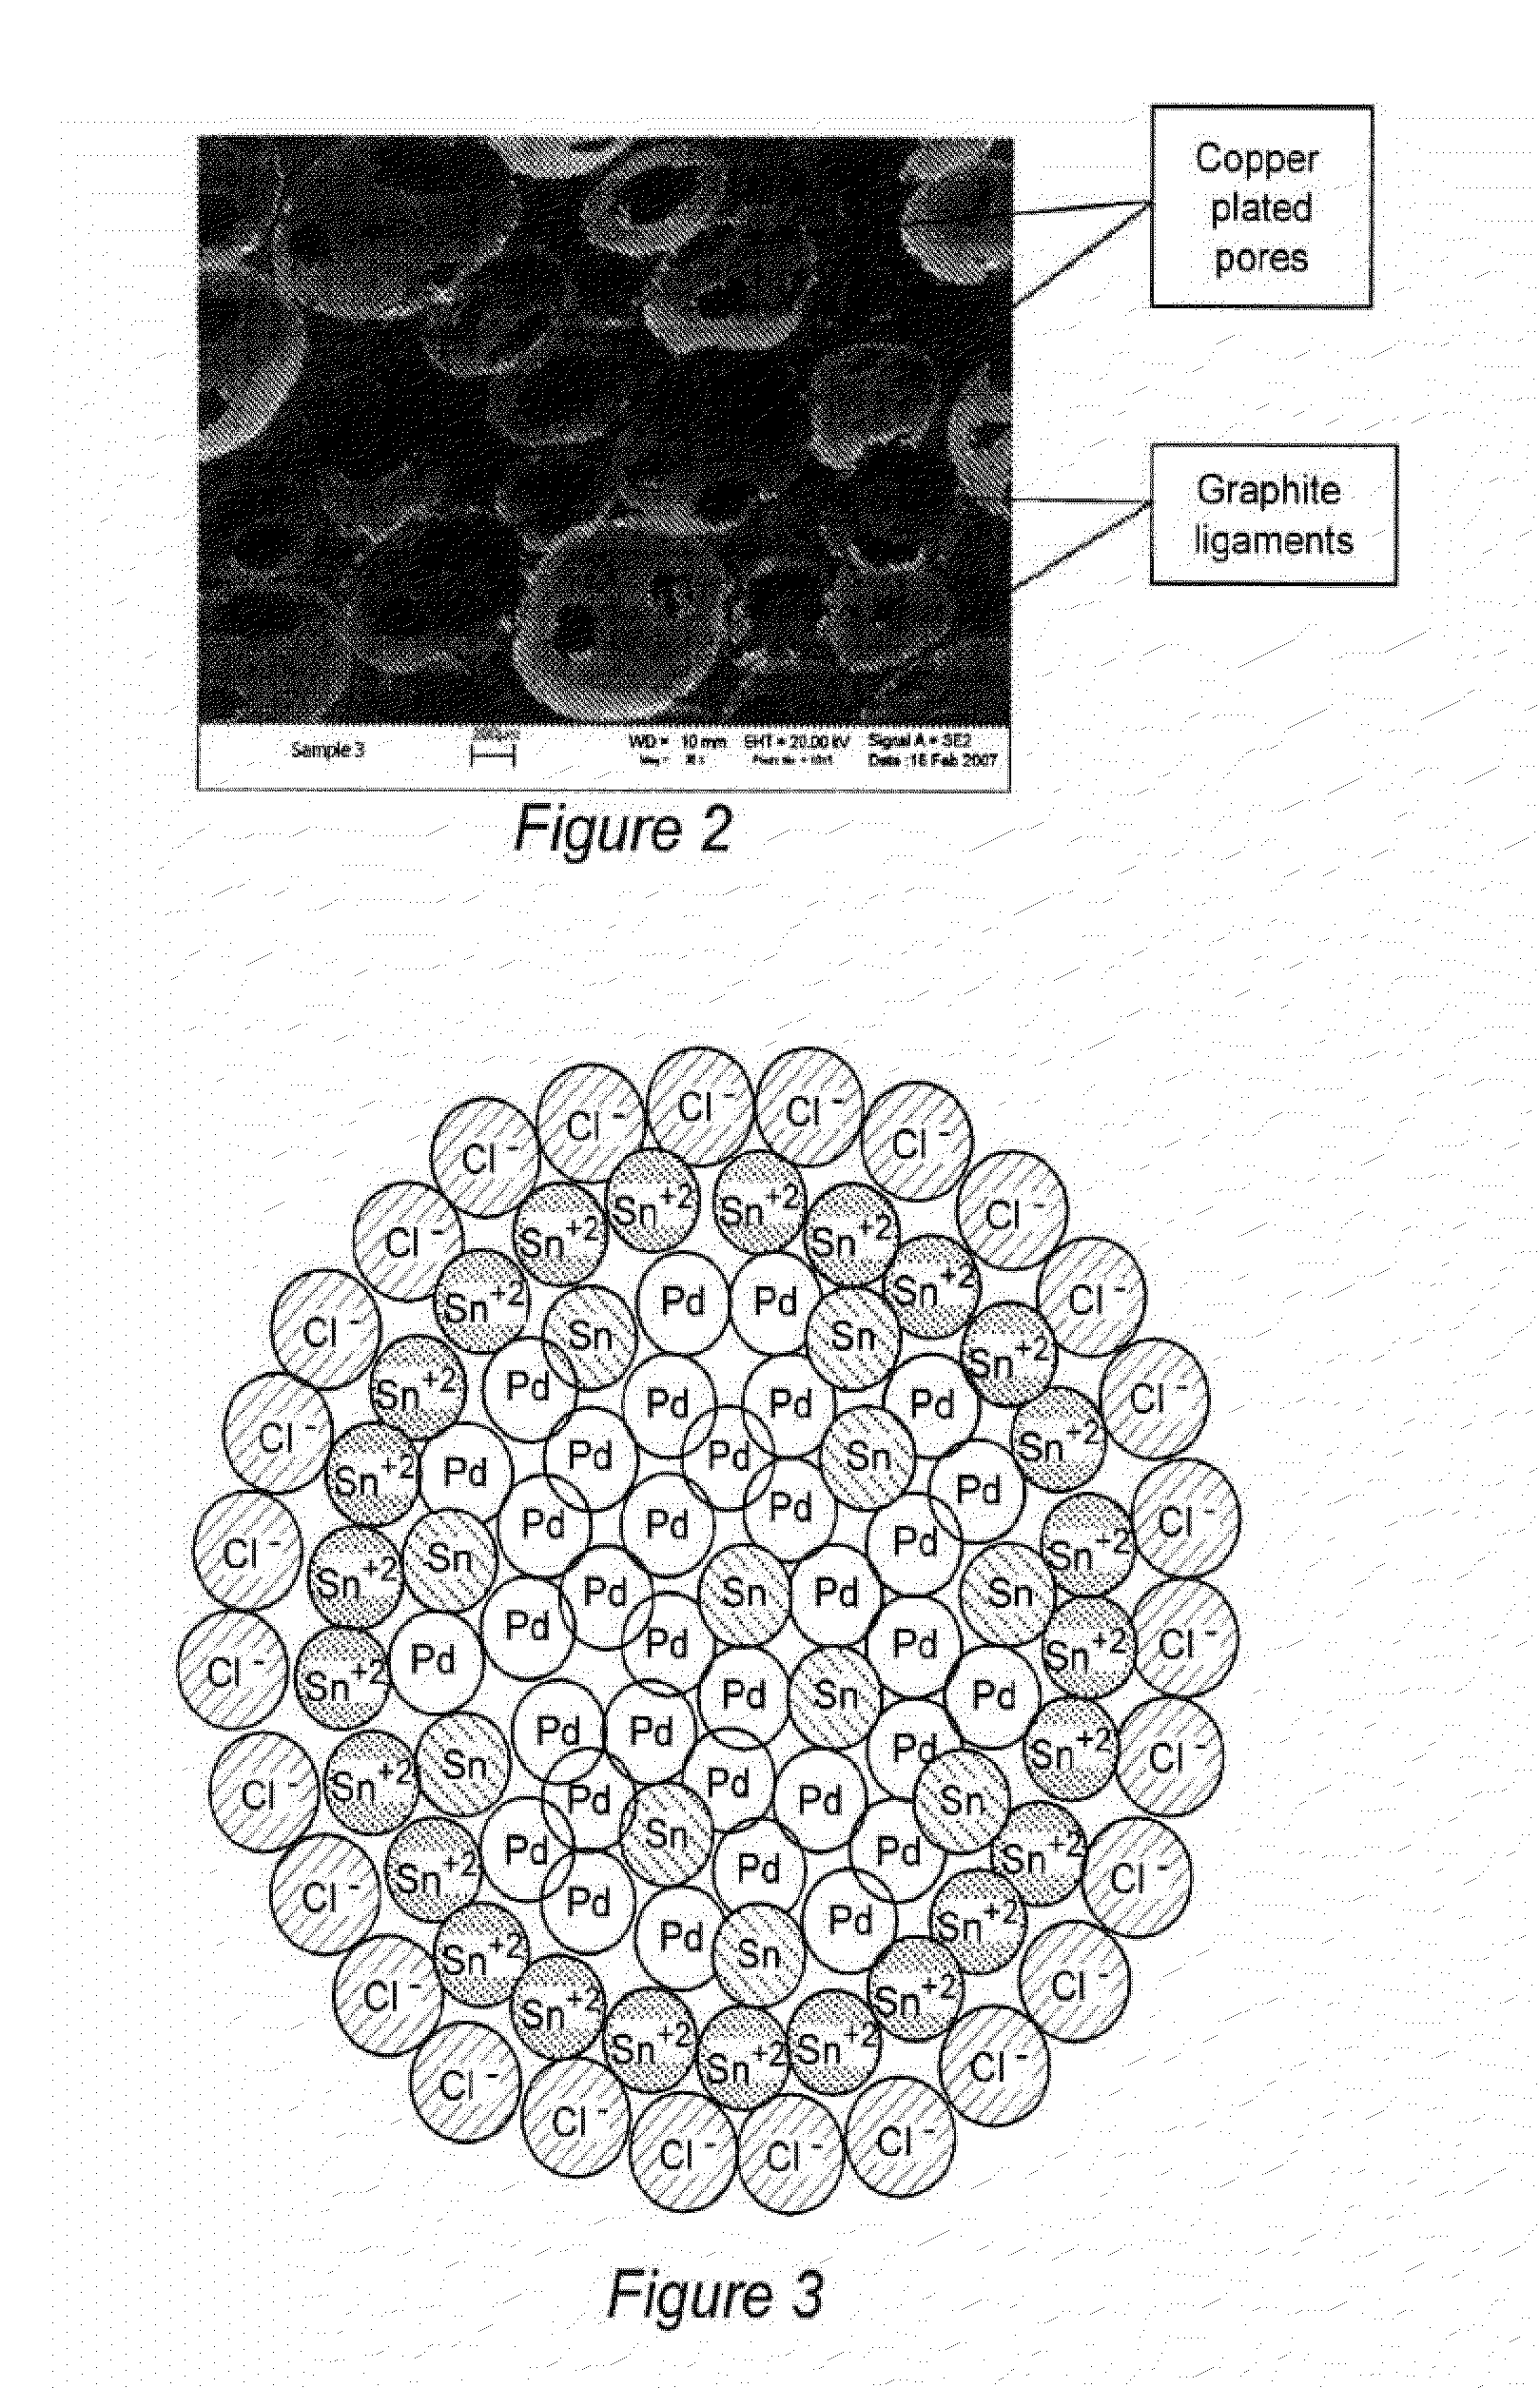 Open pore ceramic matrix coated with metal or metal alloys and methods of making same